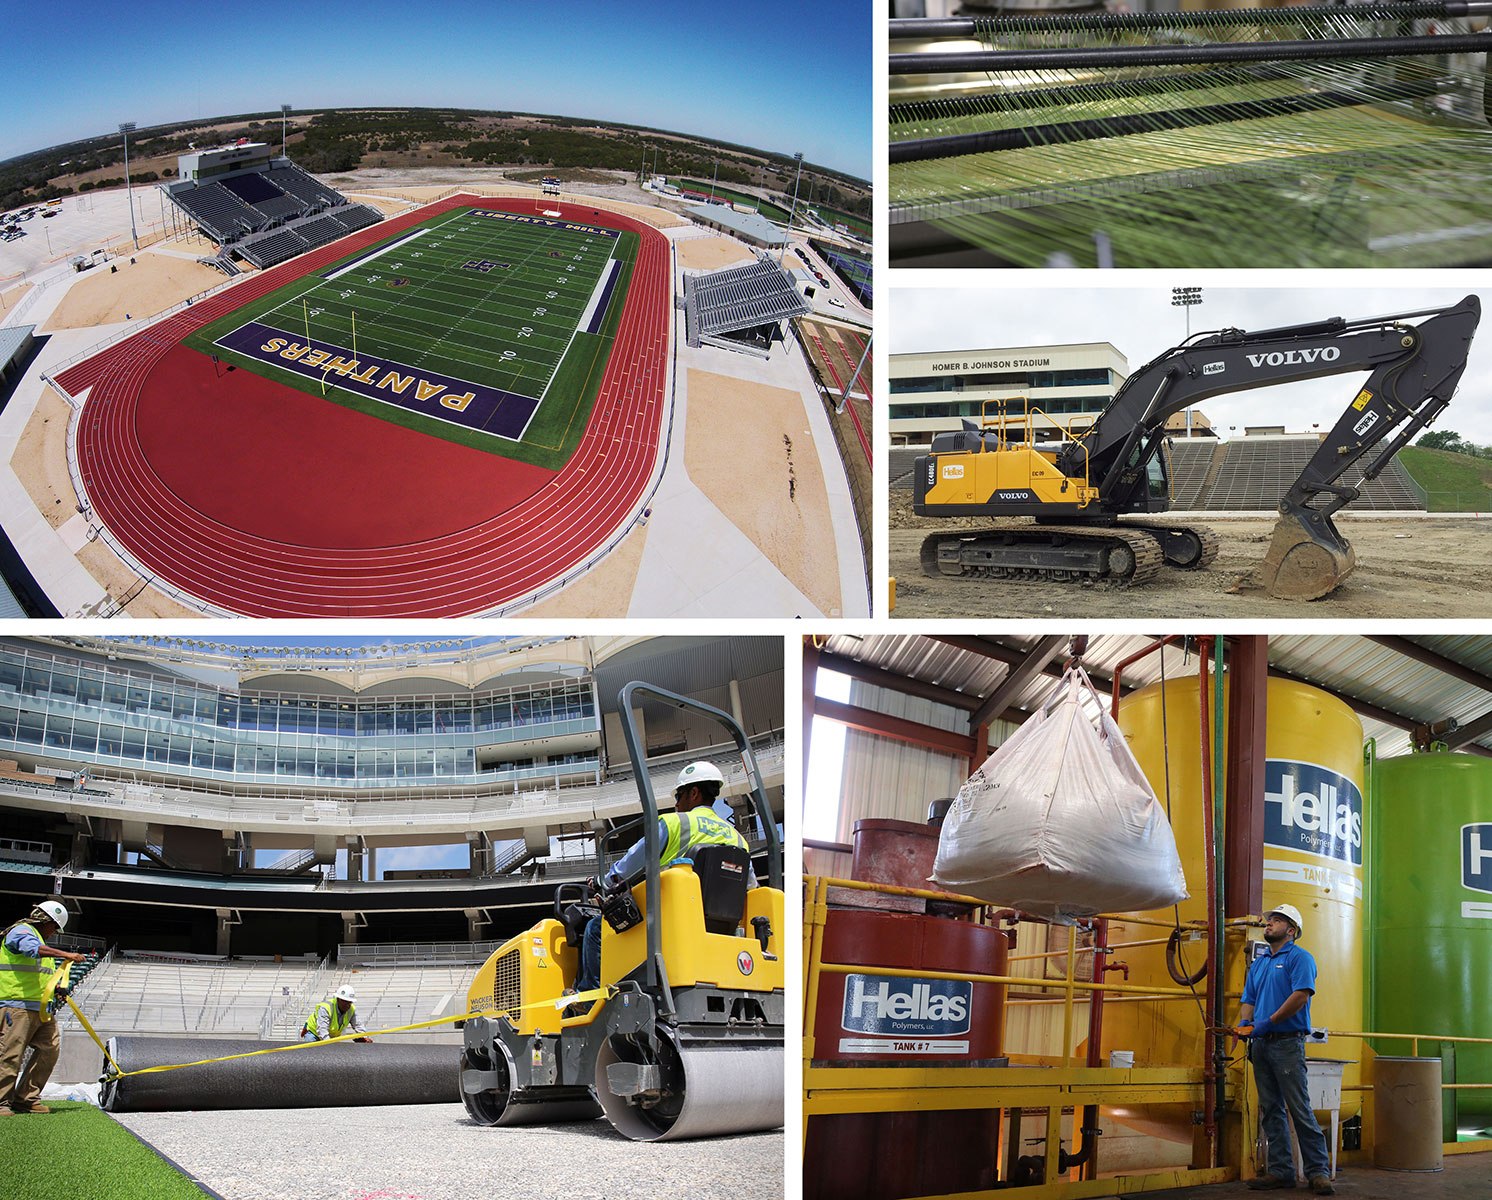 Hellas Construction offers all turnkey athletic surfacing services in-house, using only the highest-quality raw materials from start to finish.